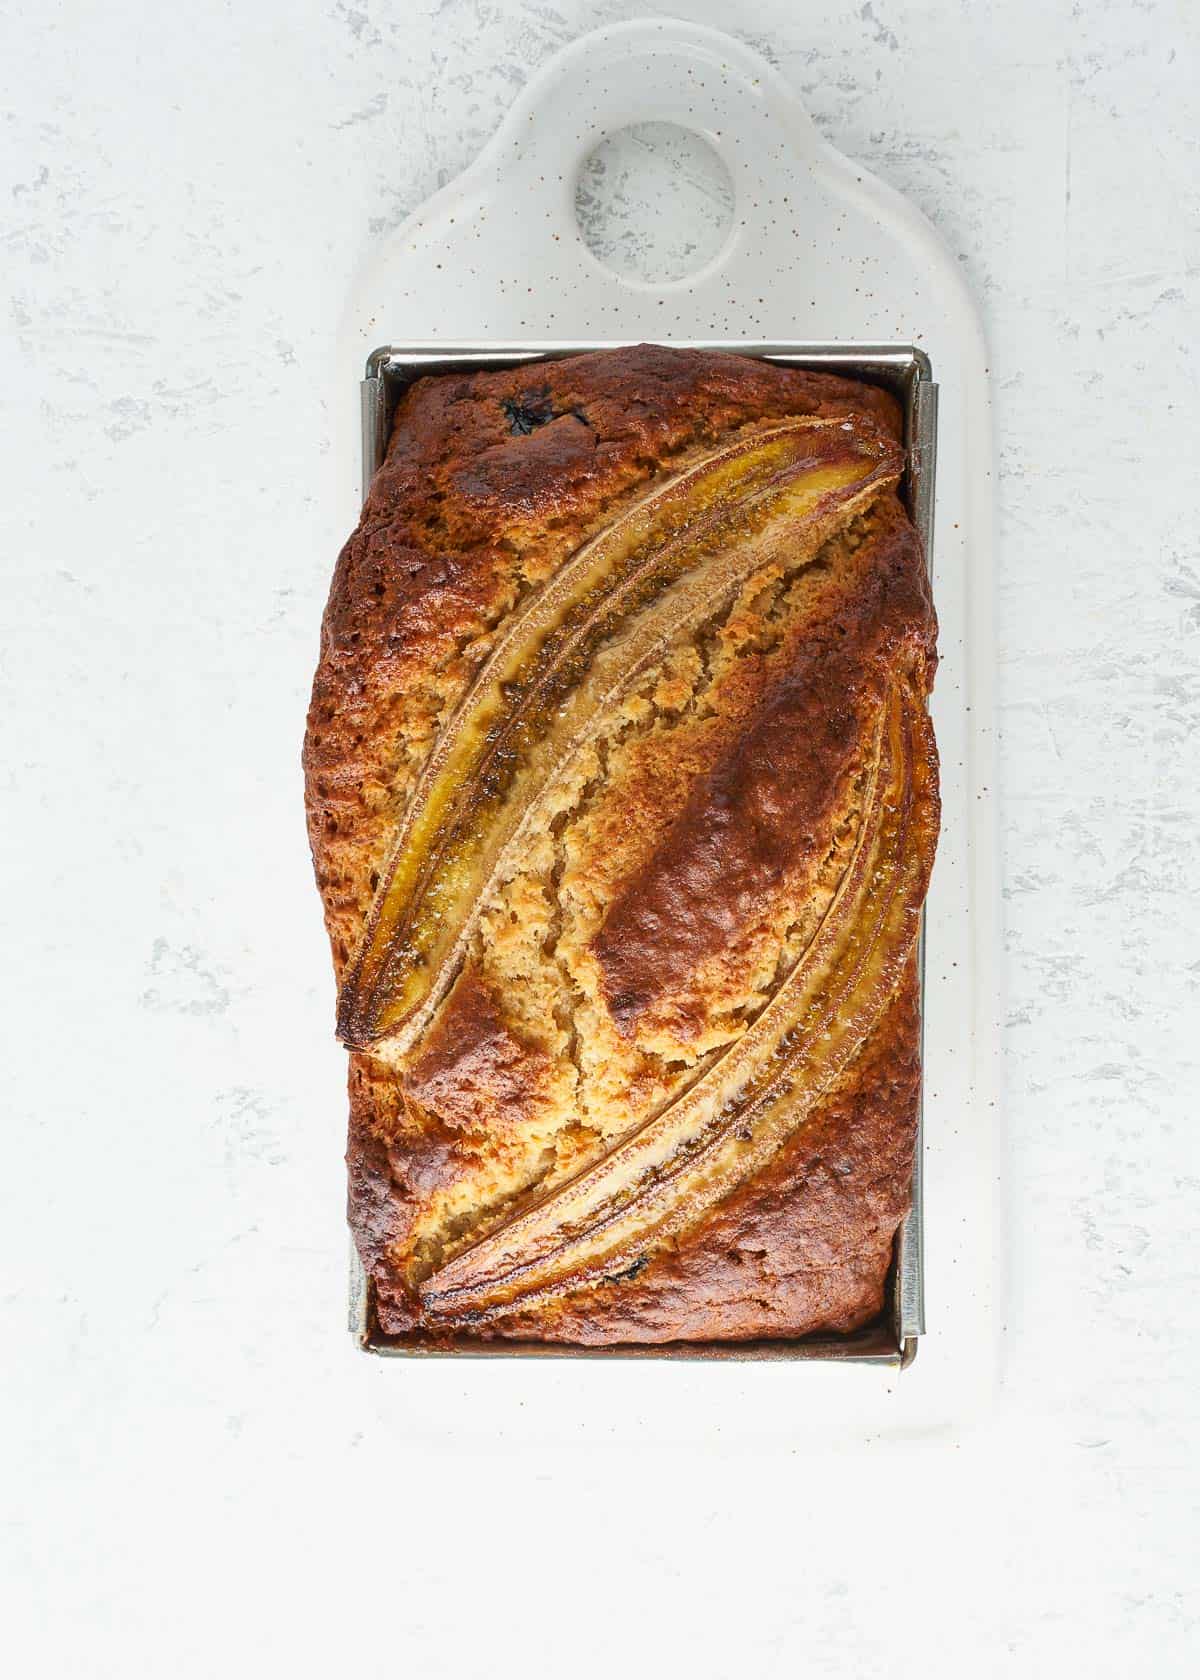 a freshly baked loaf of banana bread, fresh out of the oven.